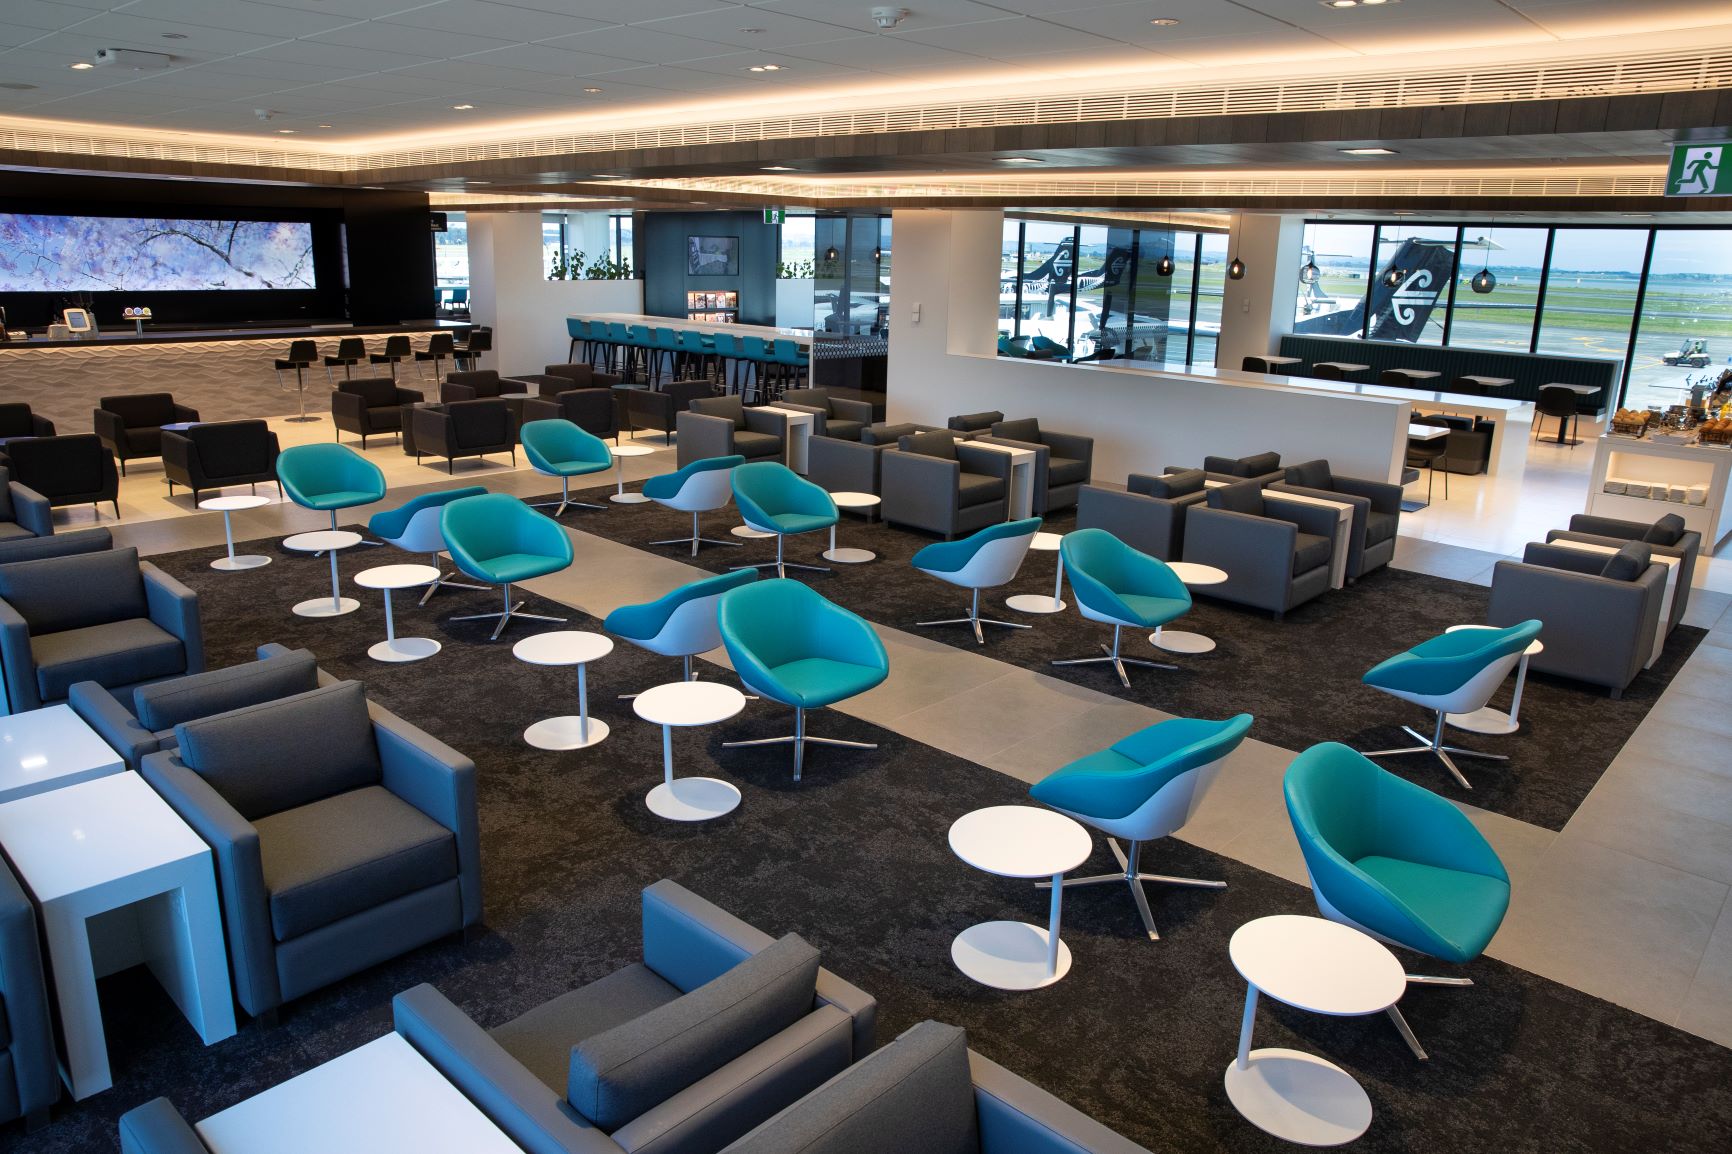 The Koru Lounge is back - but not as we knew it